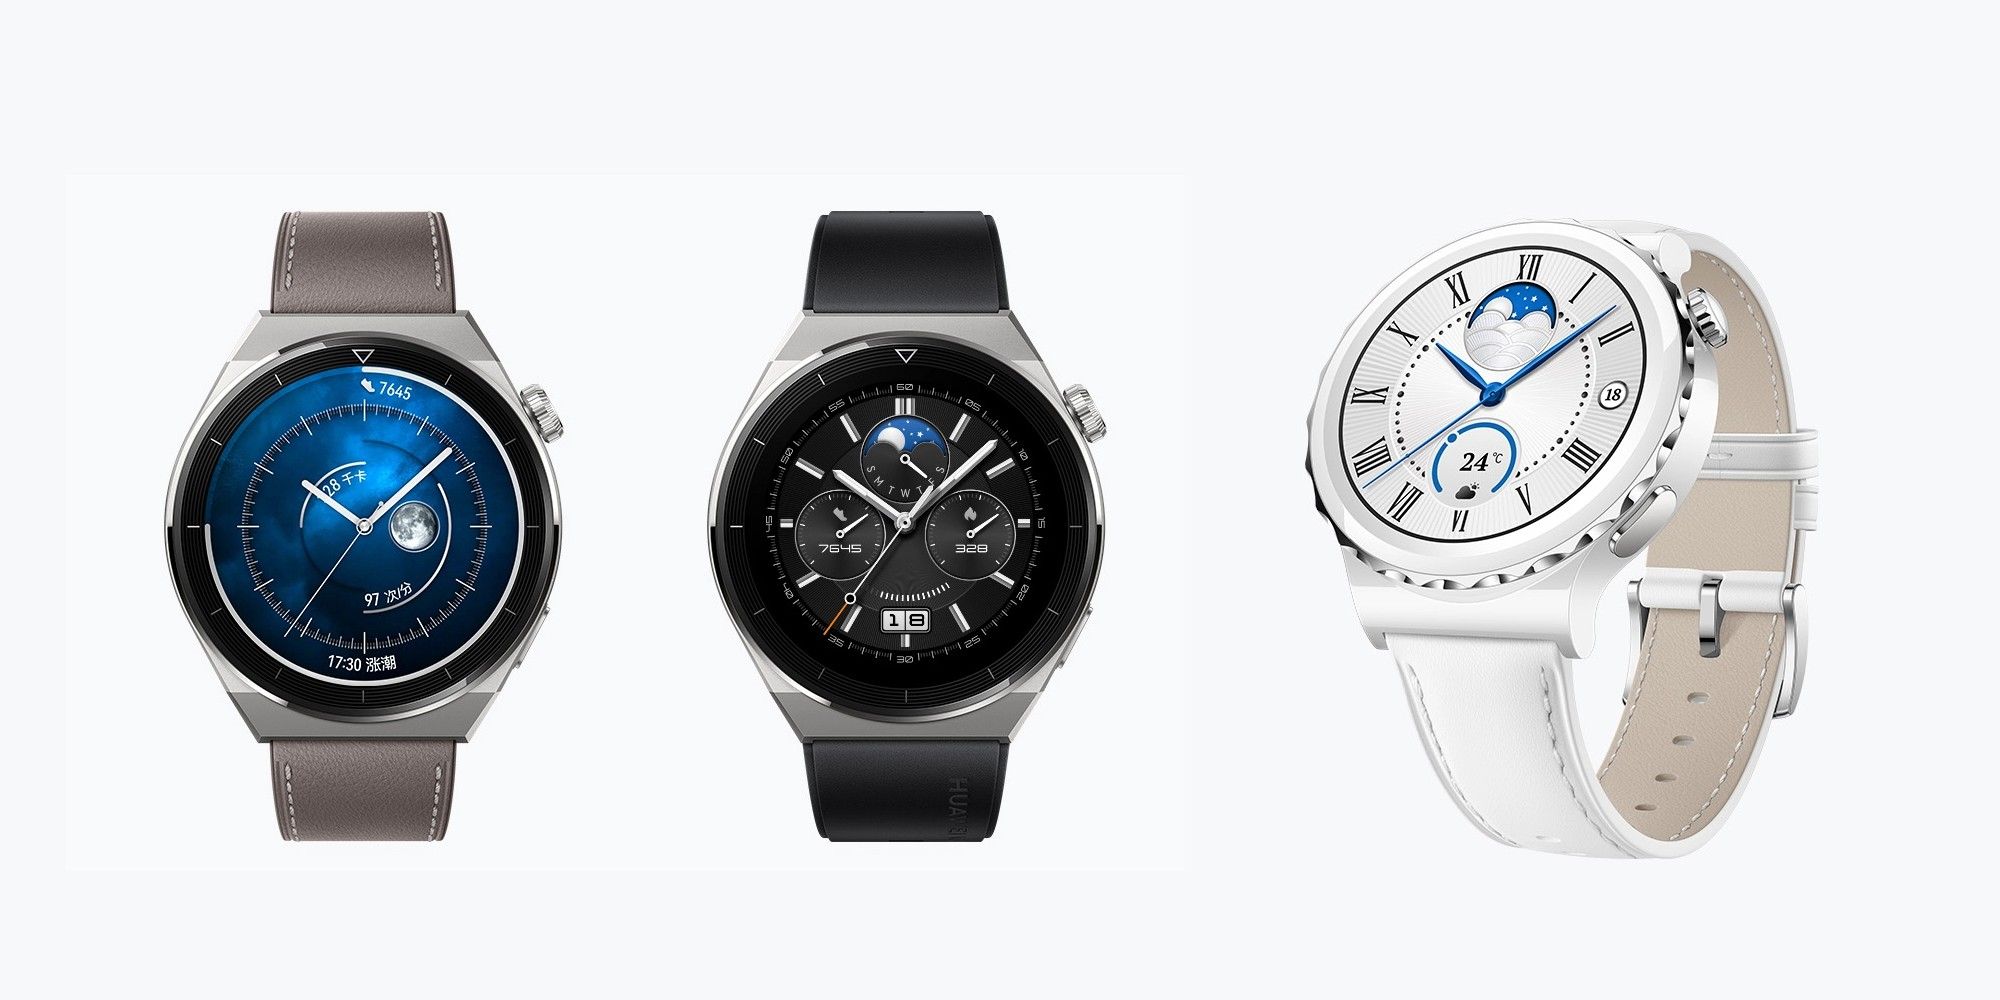 The Huawei Watch GT 3 Pro comes in Titanium and Ceramic variants